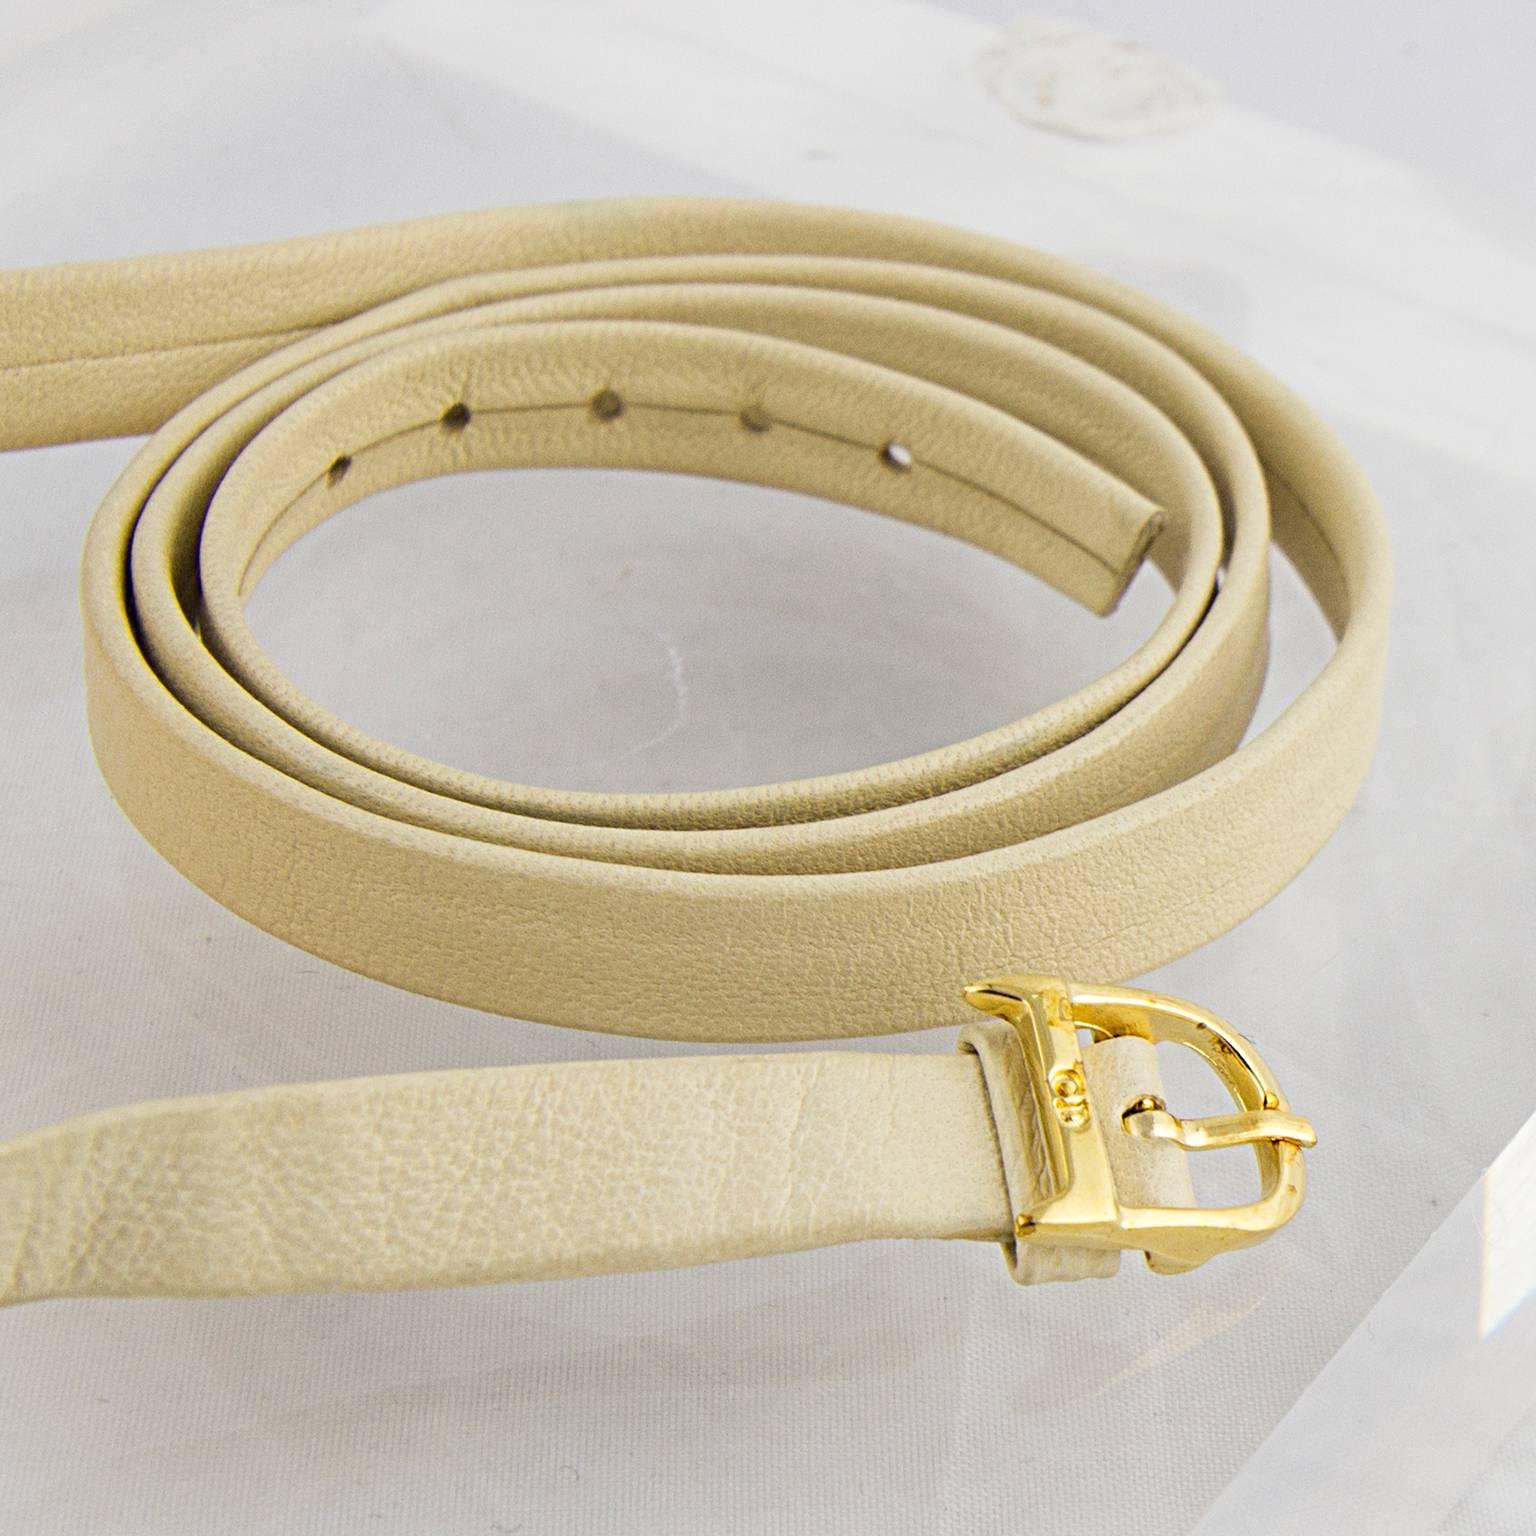 A super fashionable chocker by Christian Dior.
Cream leather with horn detail.
Made in the 1990's.
All the rage right now this collar is a great fashion piece!
Fits an average female neck and is adjustable with a buckle.
This piece is very long and